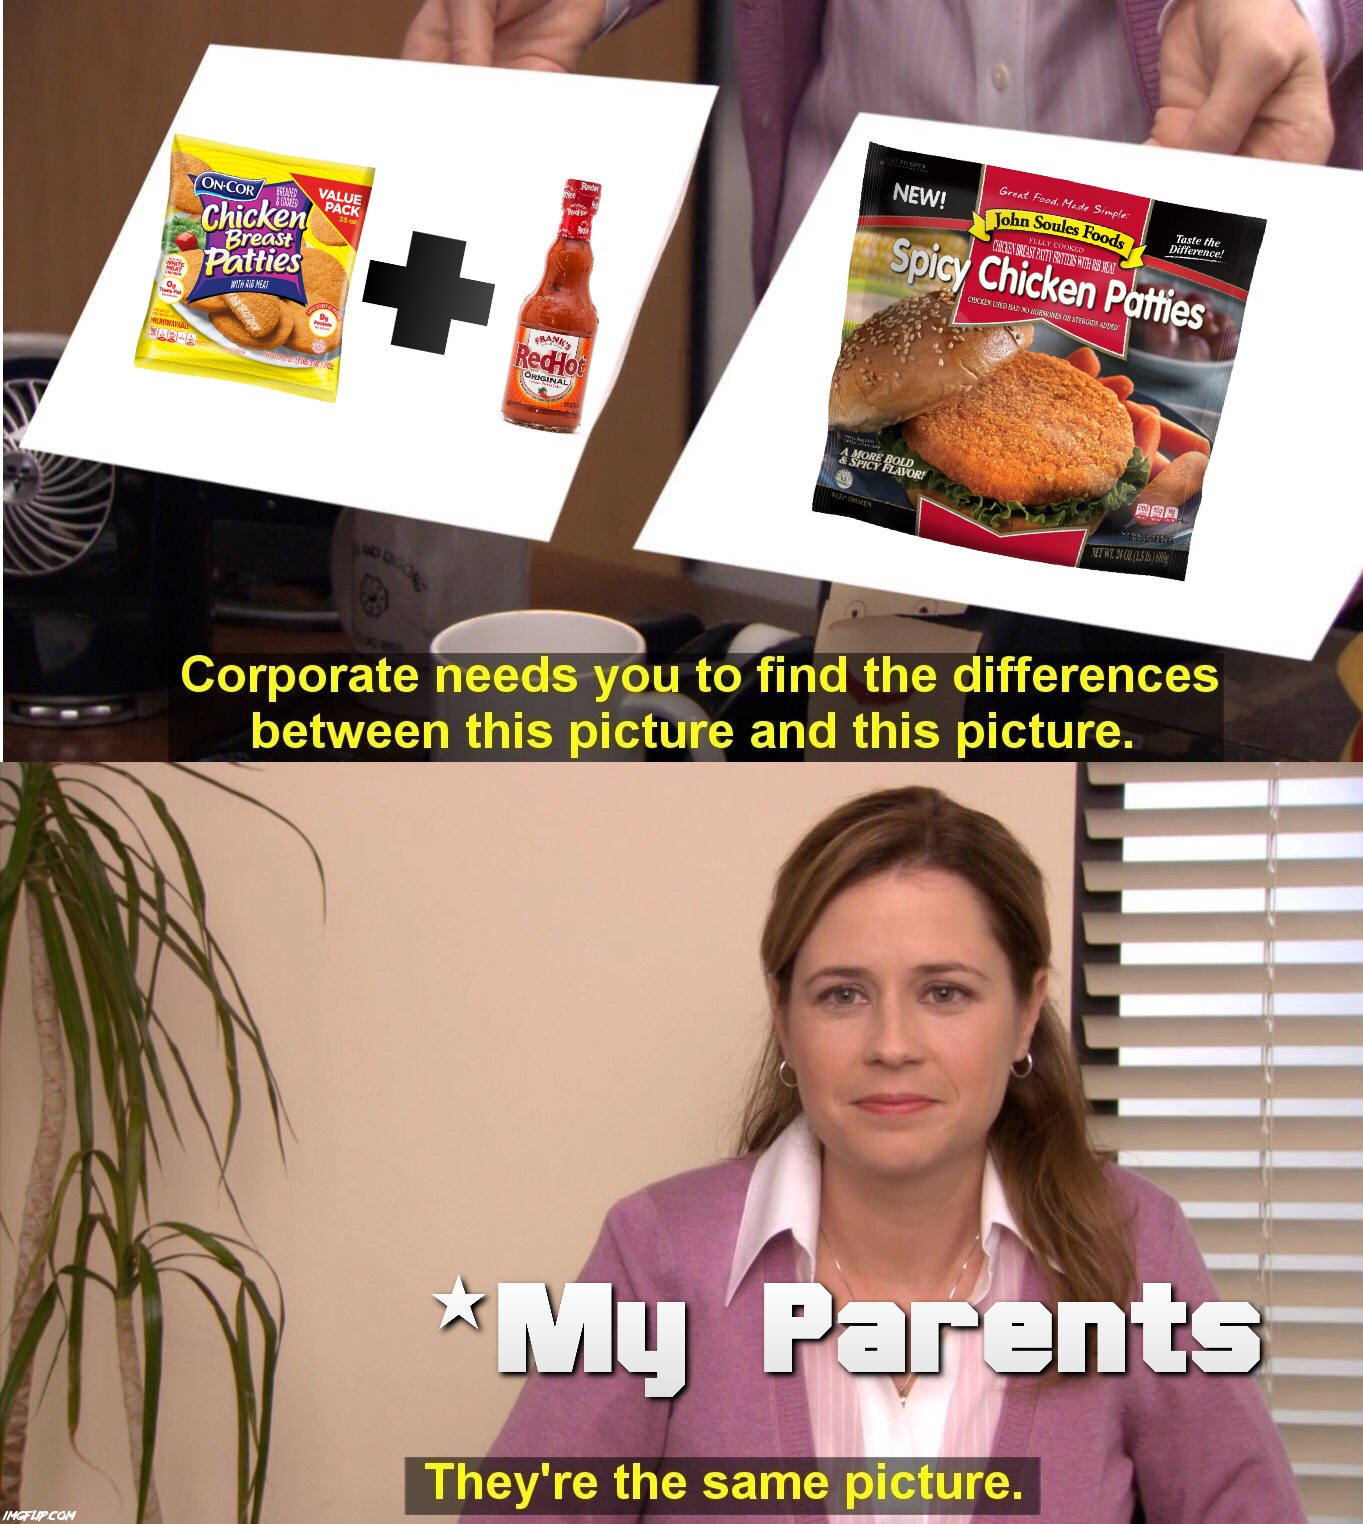 And they don't even like spicy food either, so they have no room to speak | image tagged in memes,they're the same picture,parents,bad parenting,bad parents,relatable | made w/ Imgflip meme maker